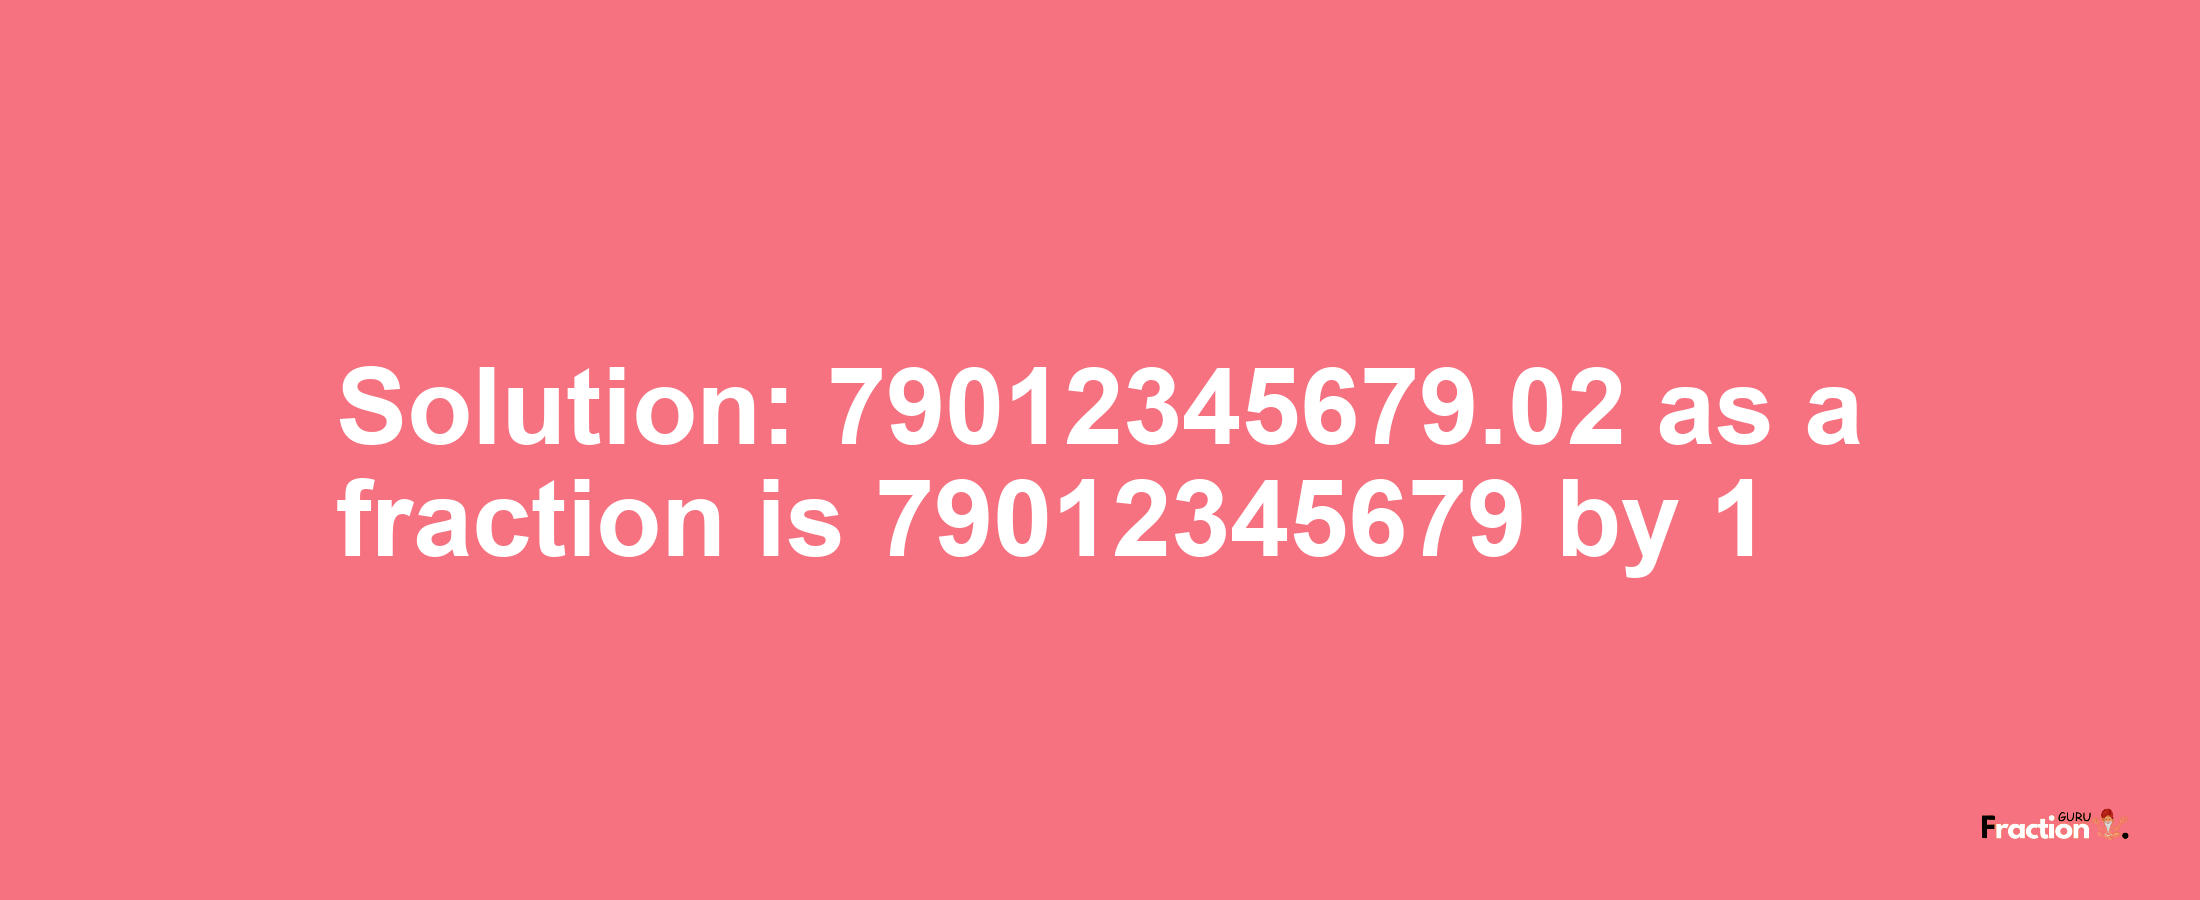 Solution:79012345679.02 as a fraction is 79012345679/1